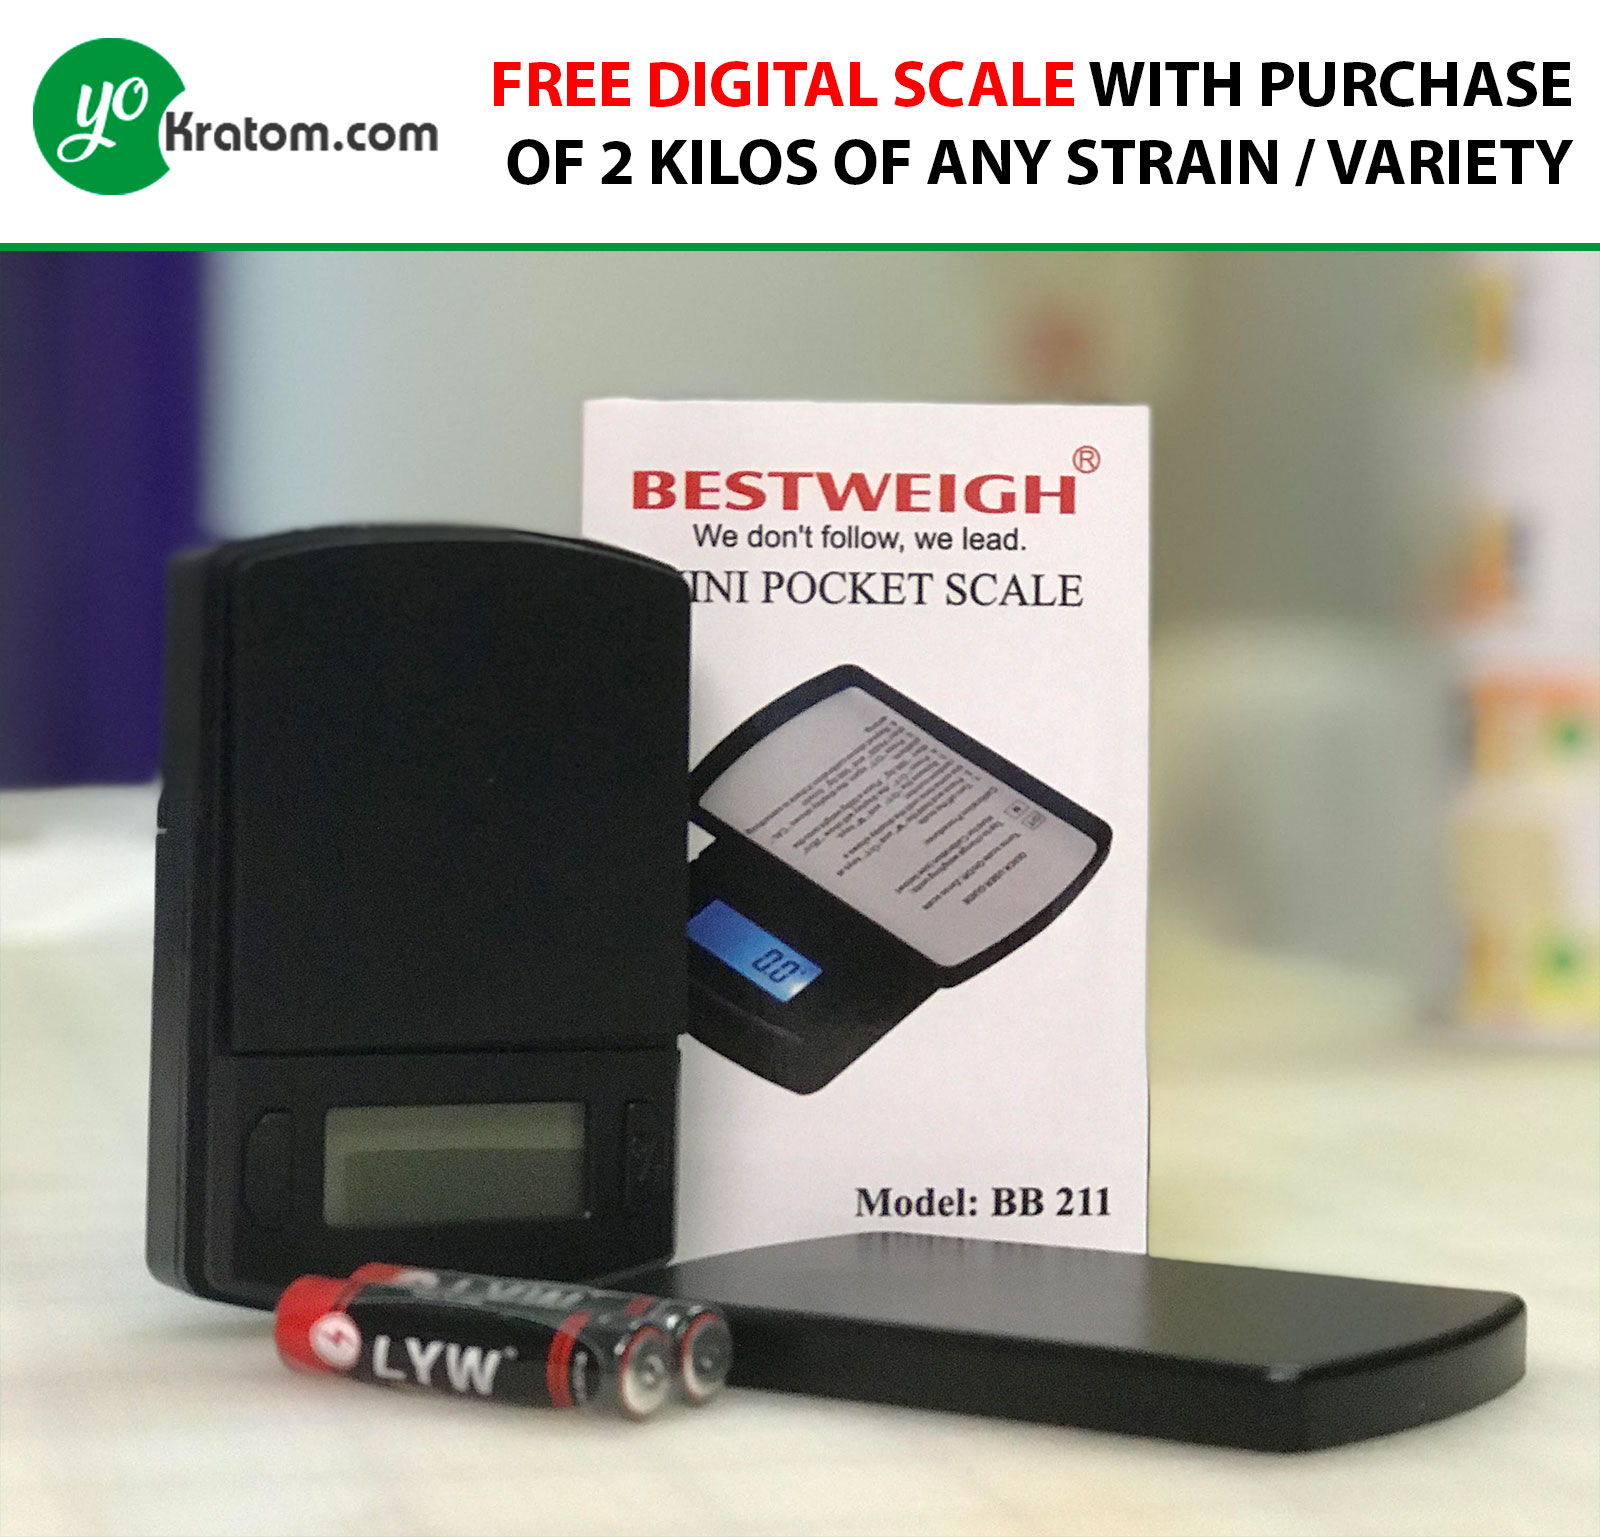 Free Digital Scale with purchase of 2 kilos while supplies last - YoKratom